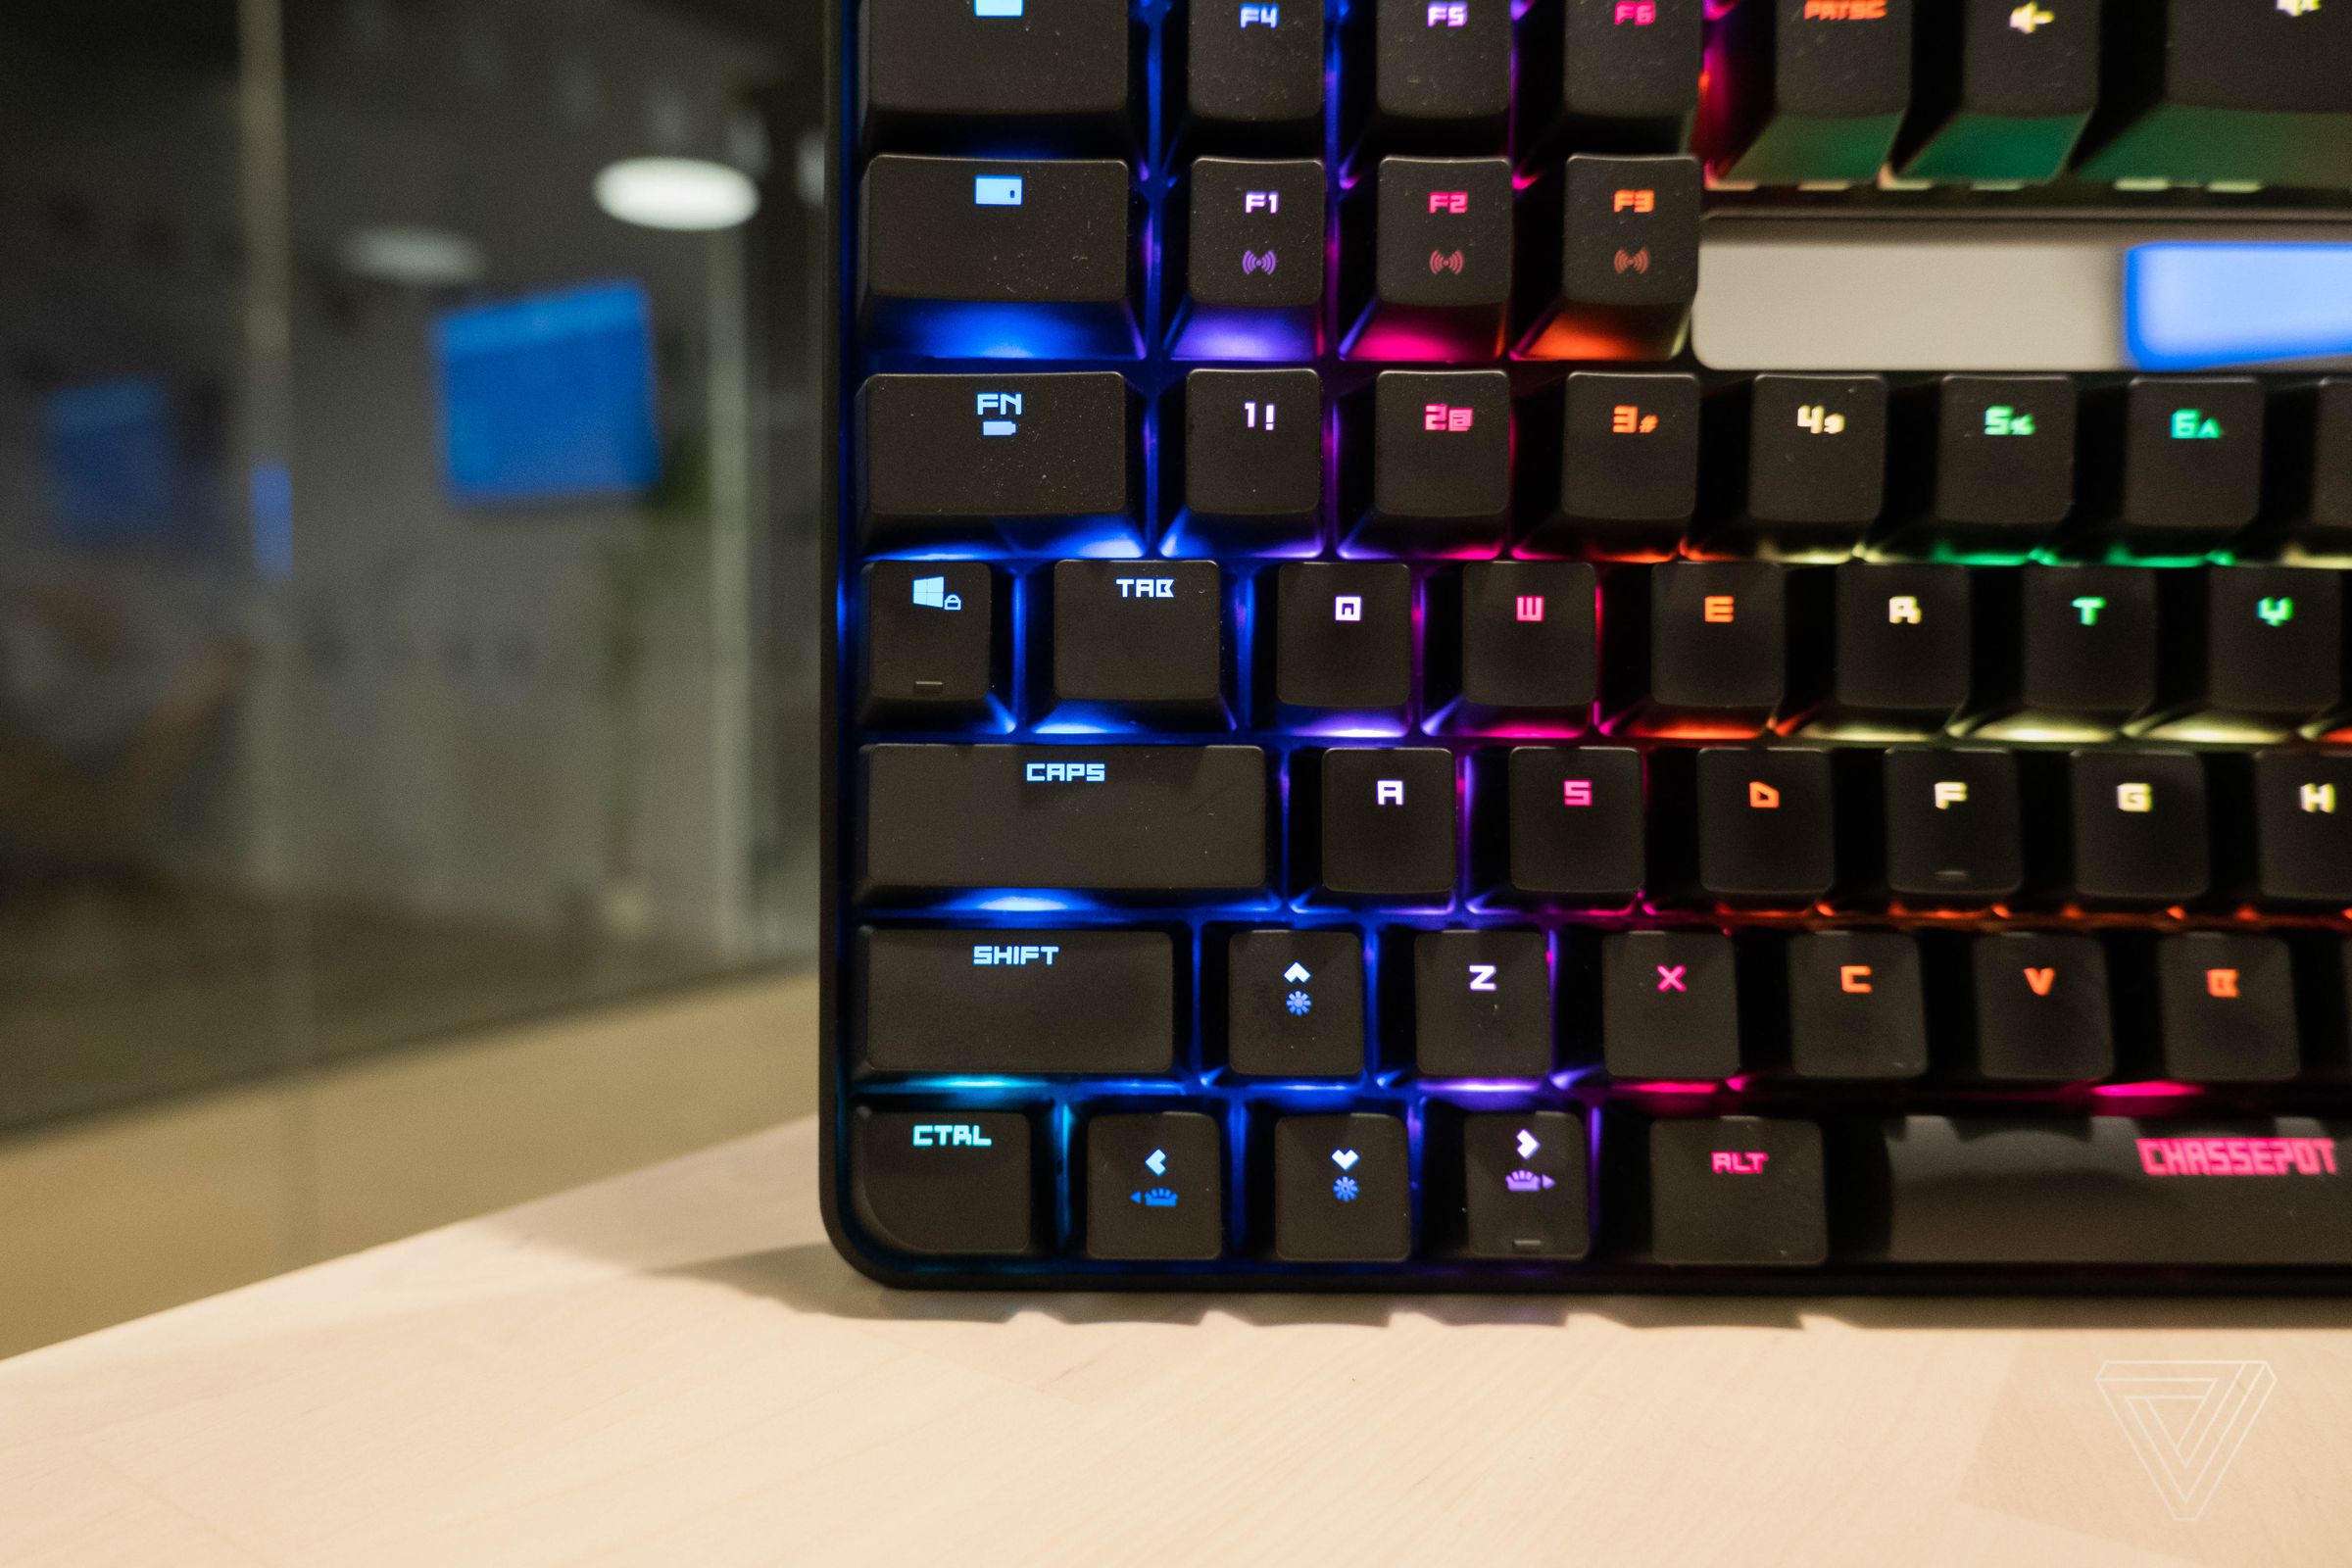 The biggest problem with the layout is the arrow keys, which sit on the left of the keyboard.